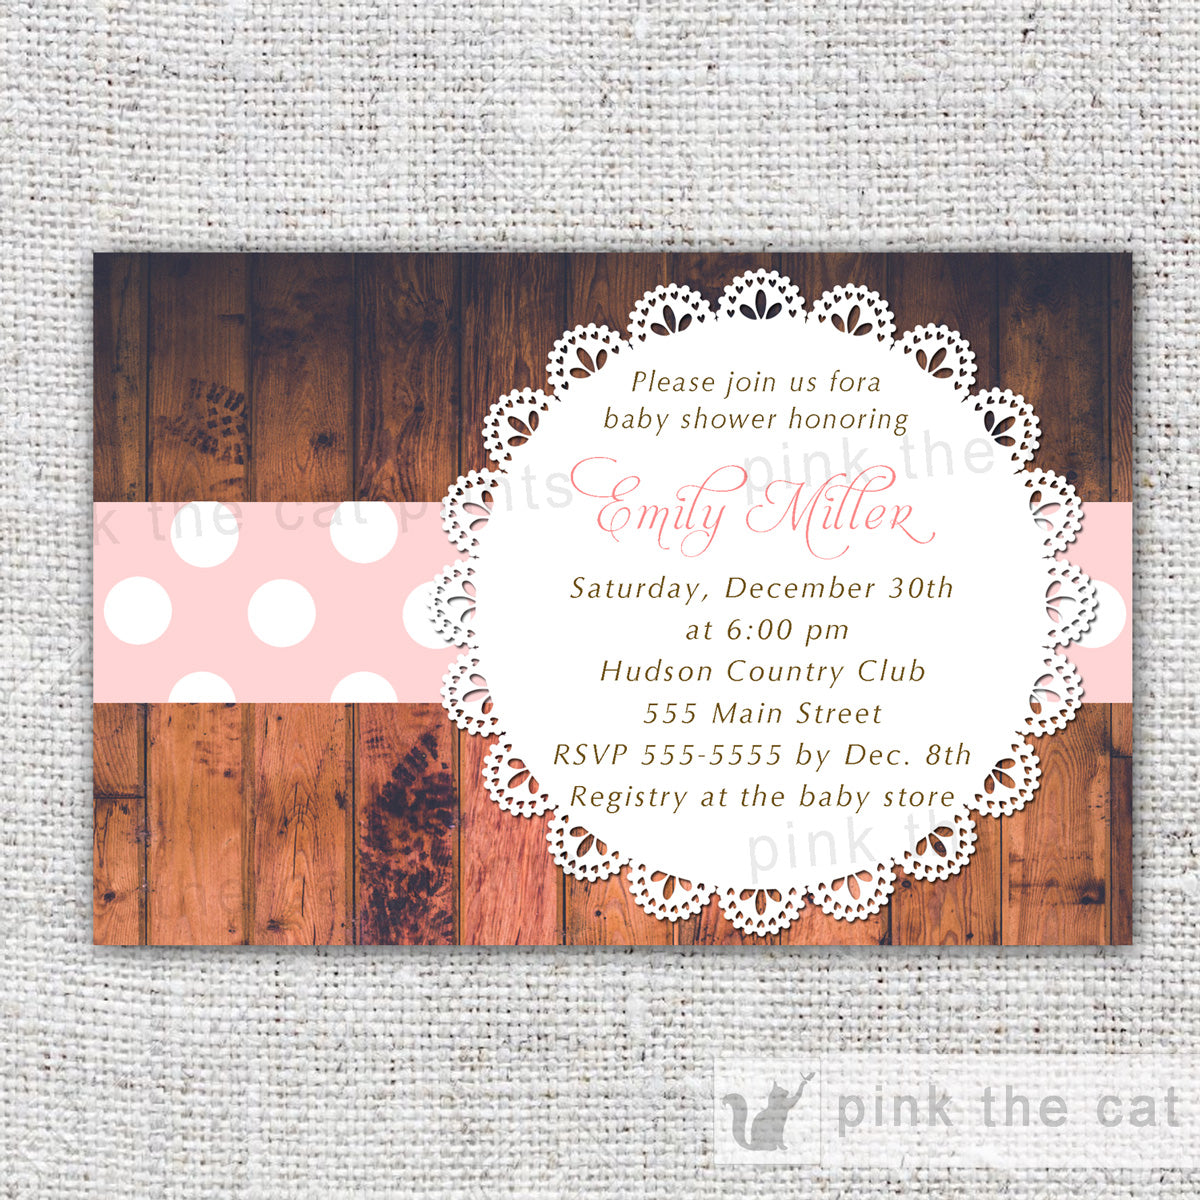 Rustic Invitations Baby Shower Birthday Doily Lace